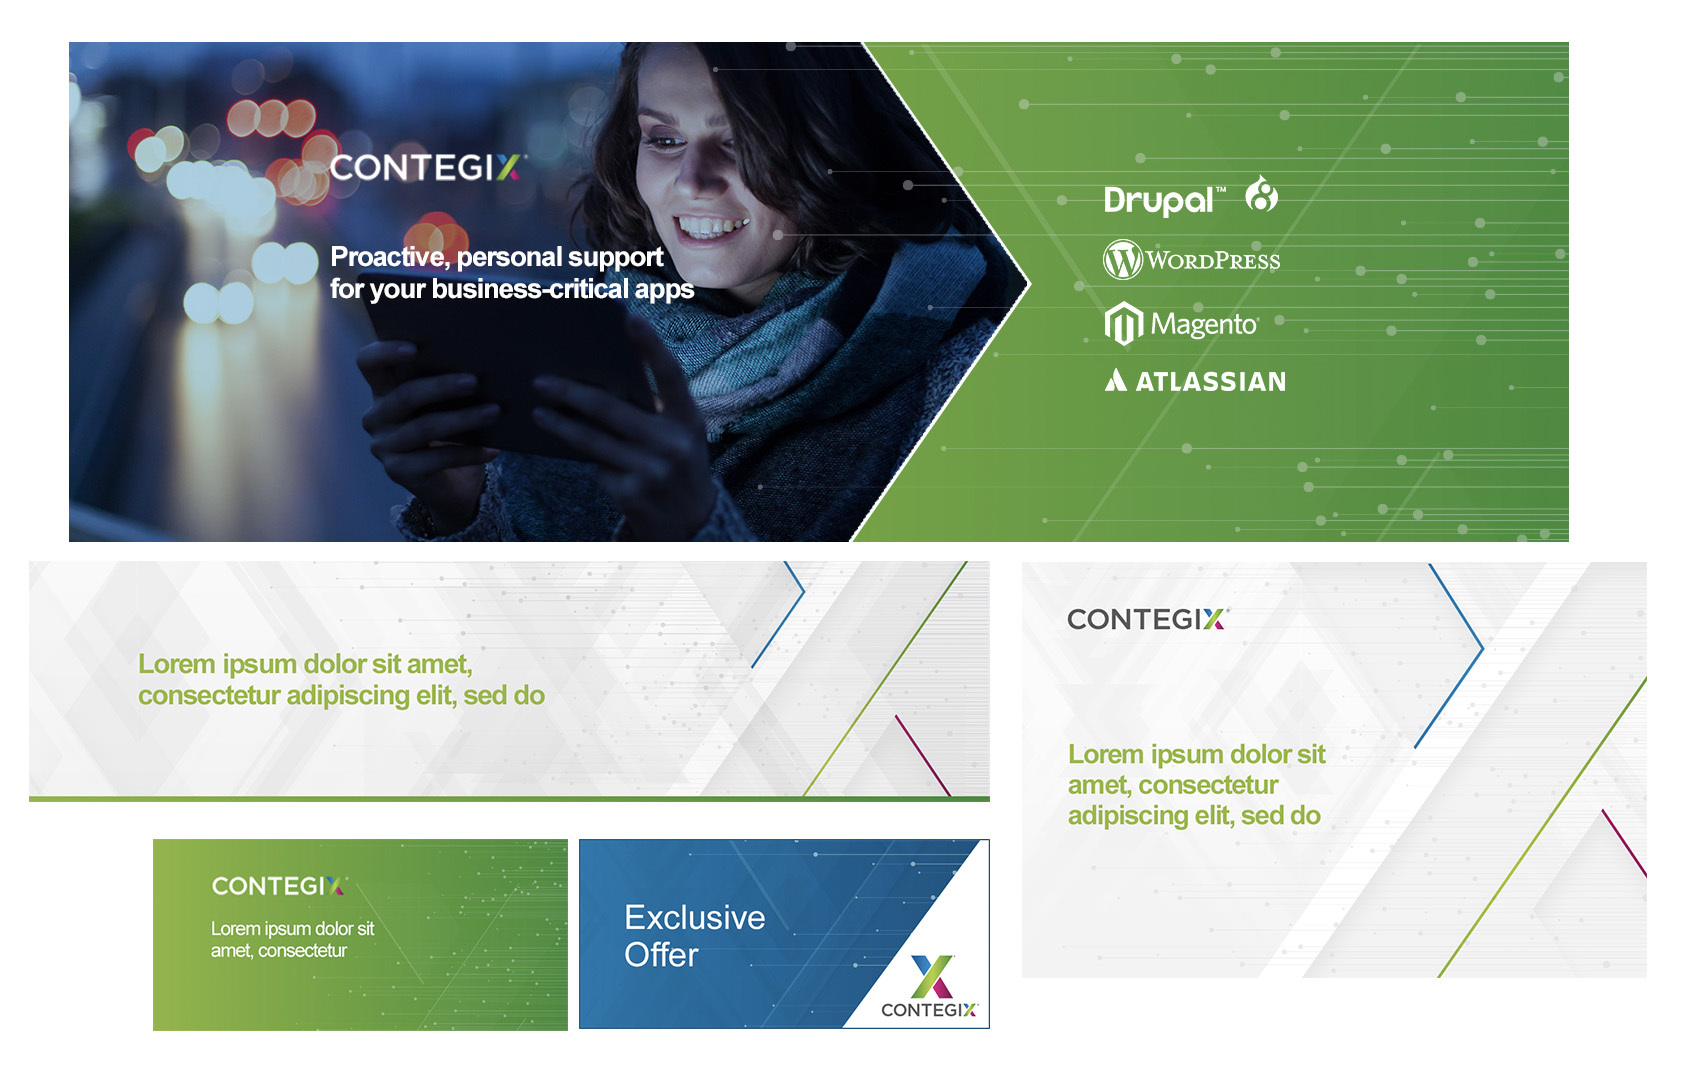 An image of the Contegix banner designs.